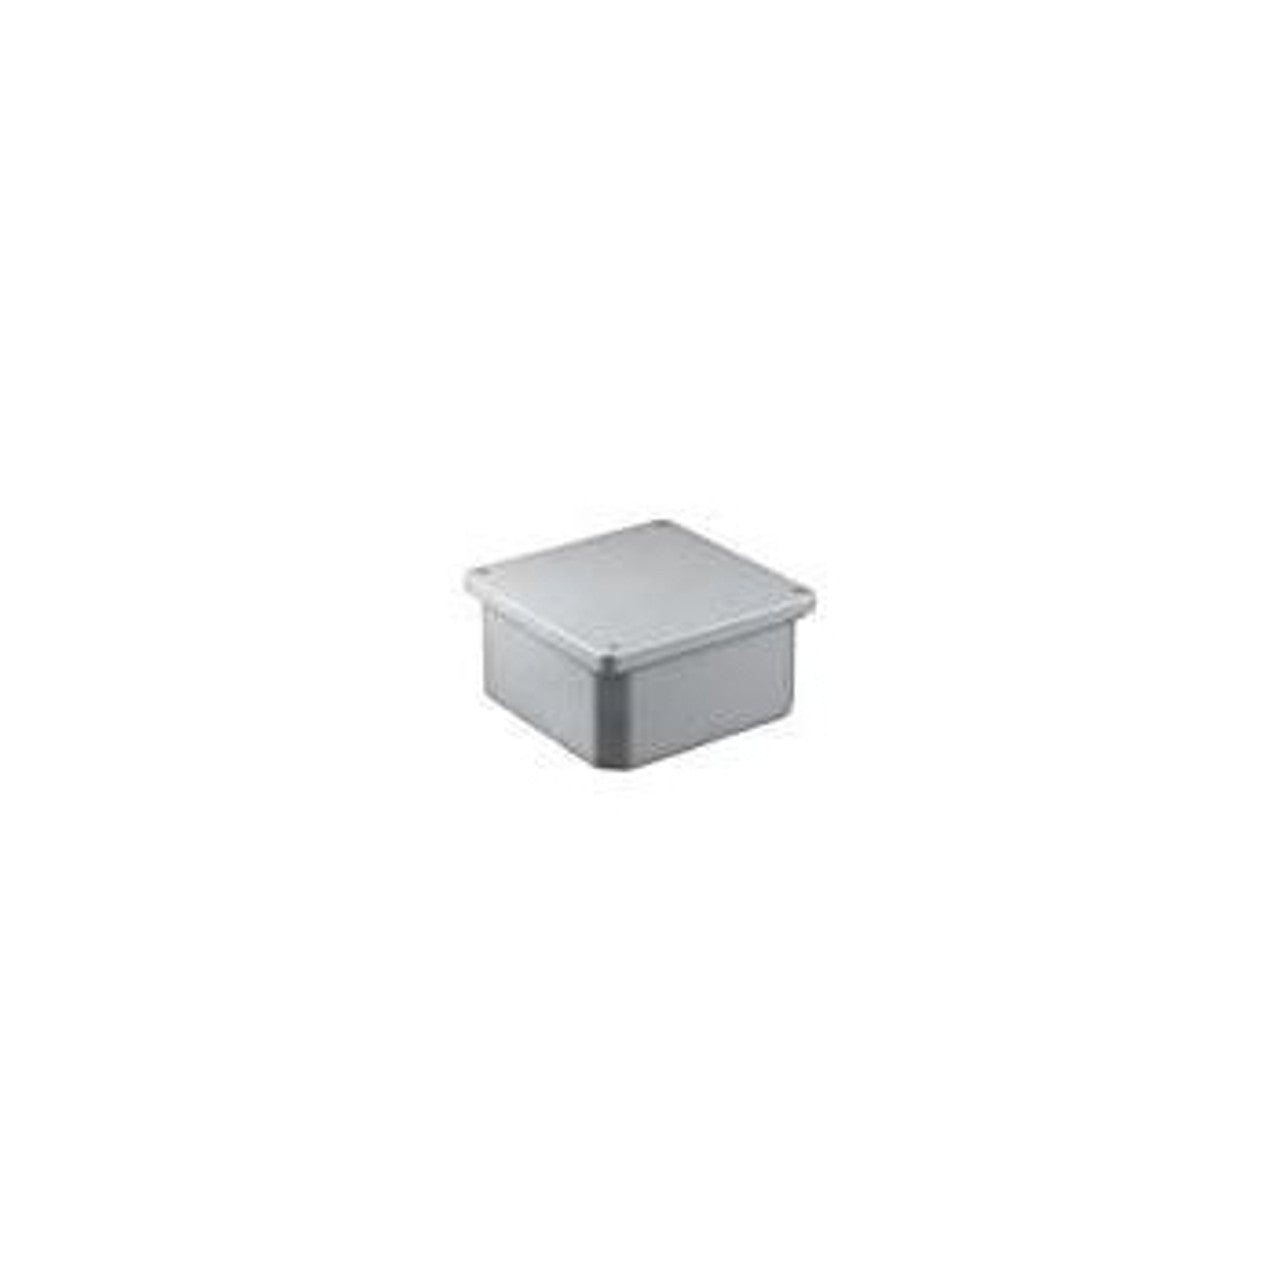 ROYAL RJB664 Conduit Junction Box With Gasket, 6 x 6 x 4 in